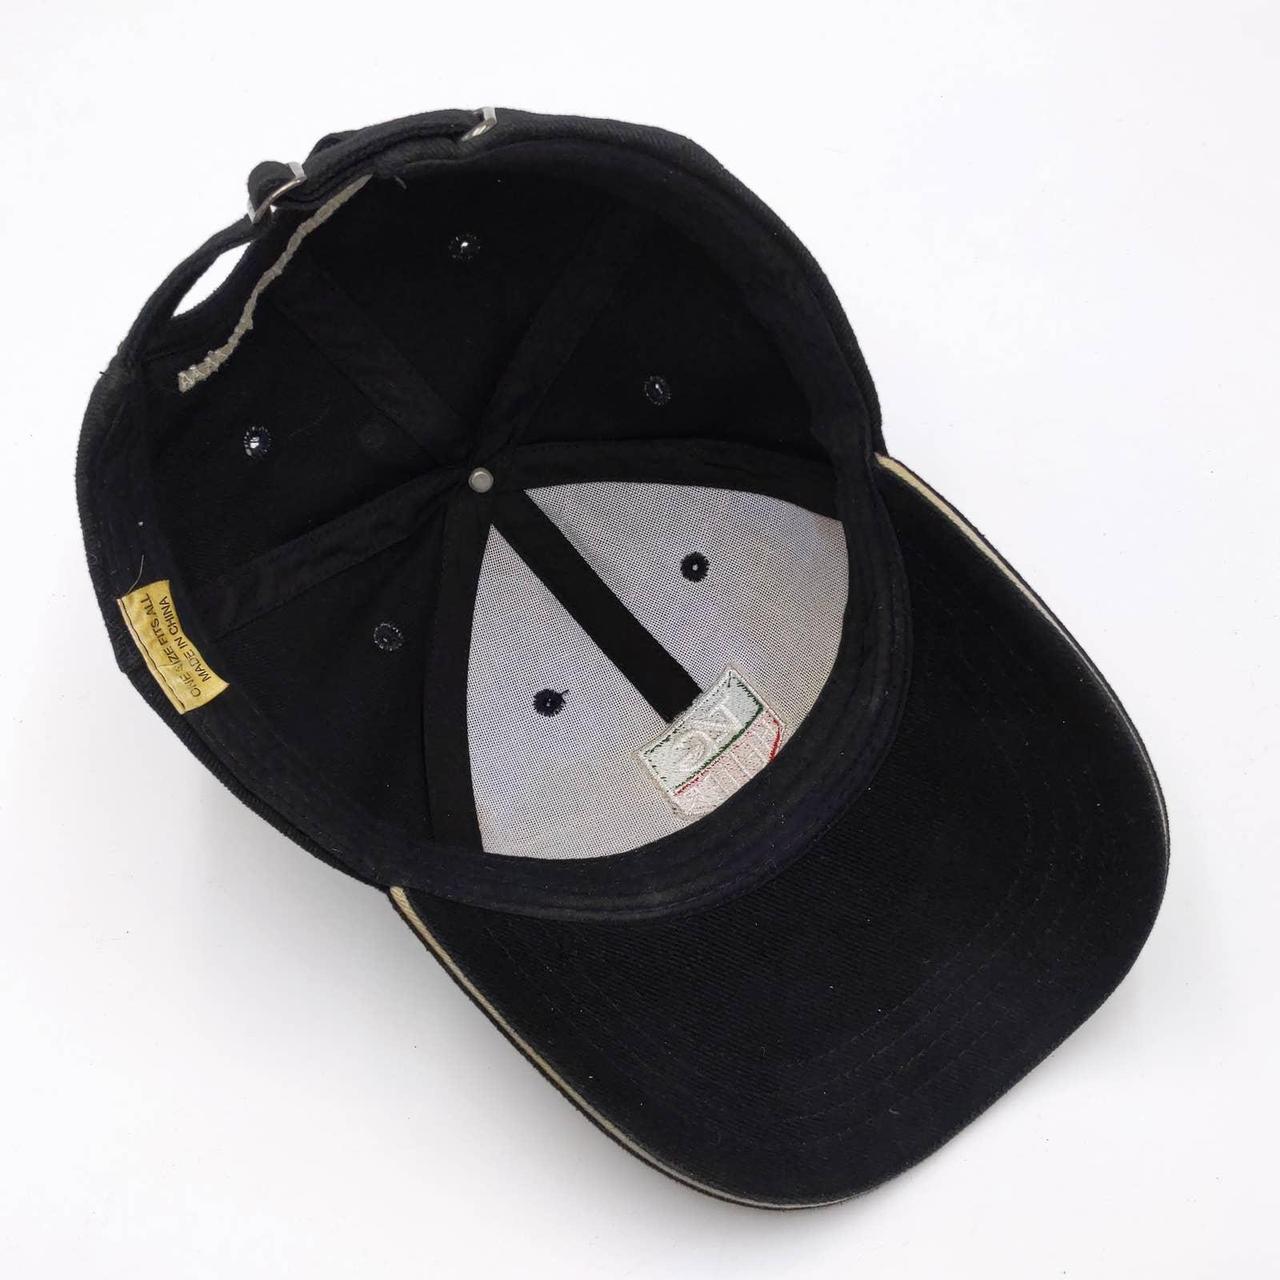 Product Image 4 - TAG Heuer Luxury Watches Hat
Color: